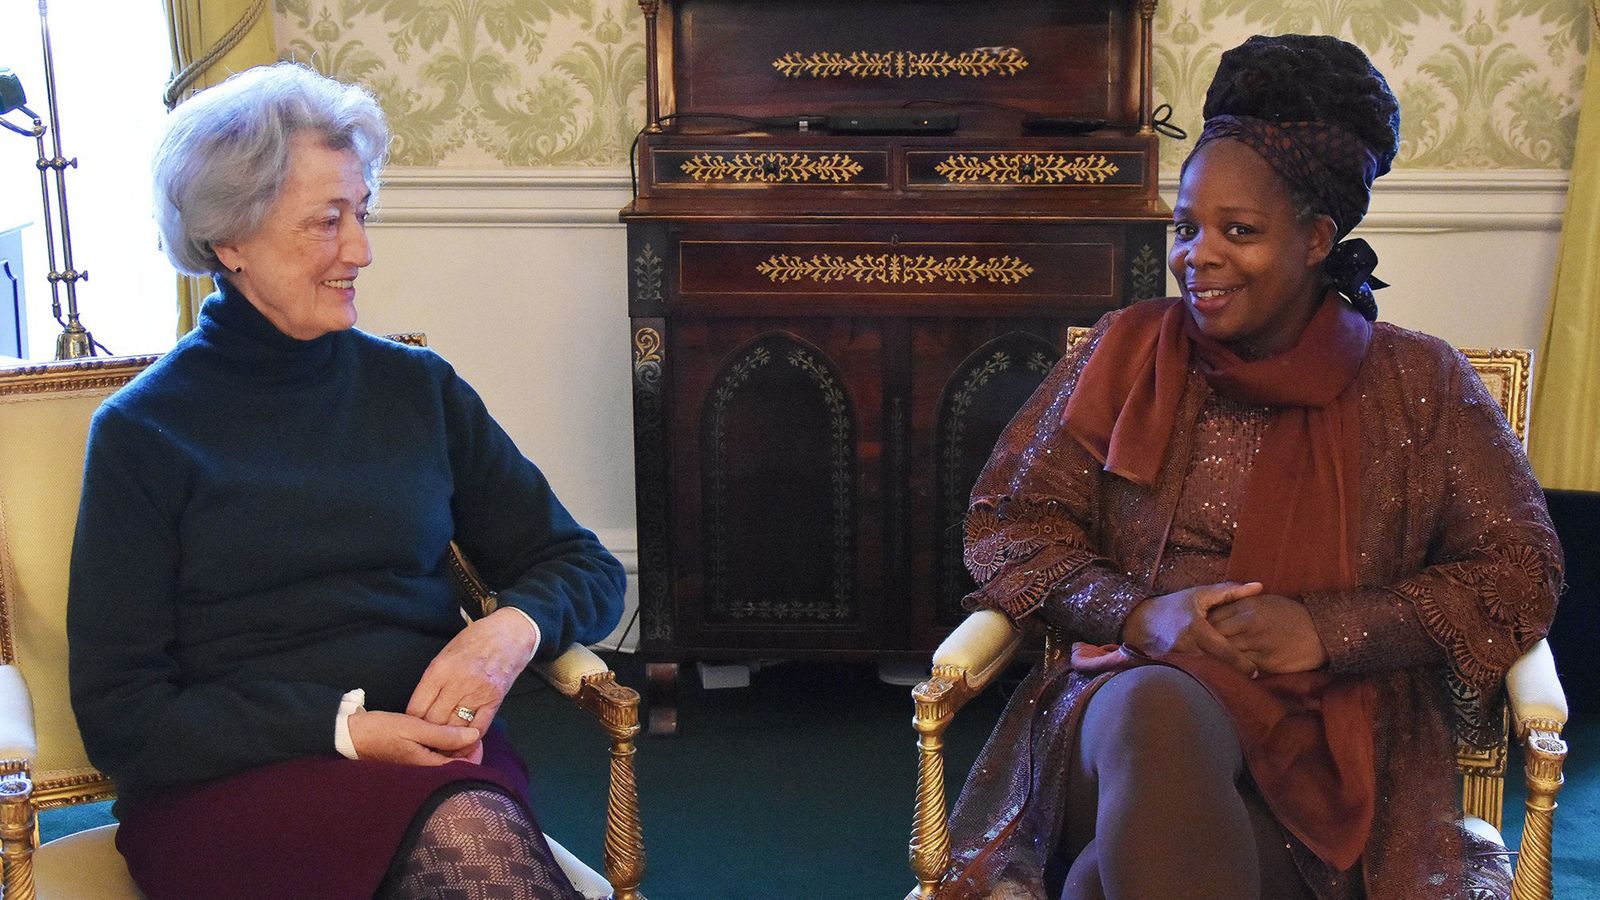 Lady Susan Hussey and Ngozi Fulani have meeting 'filled with warmth and understanding'